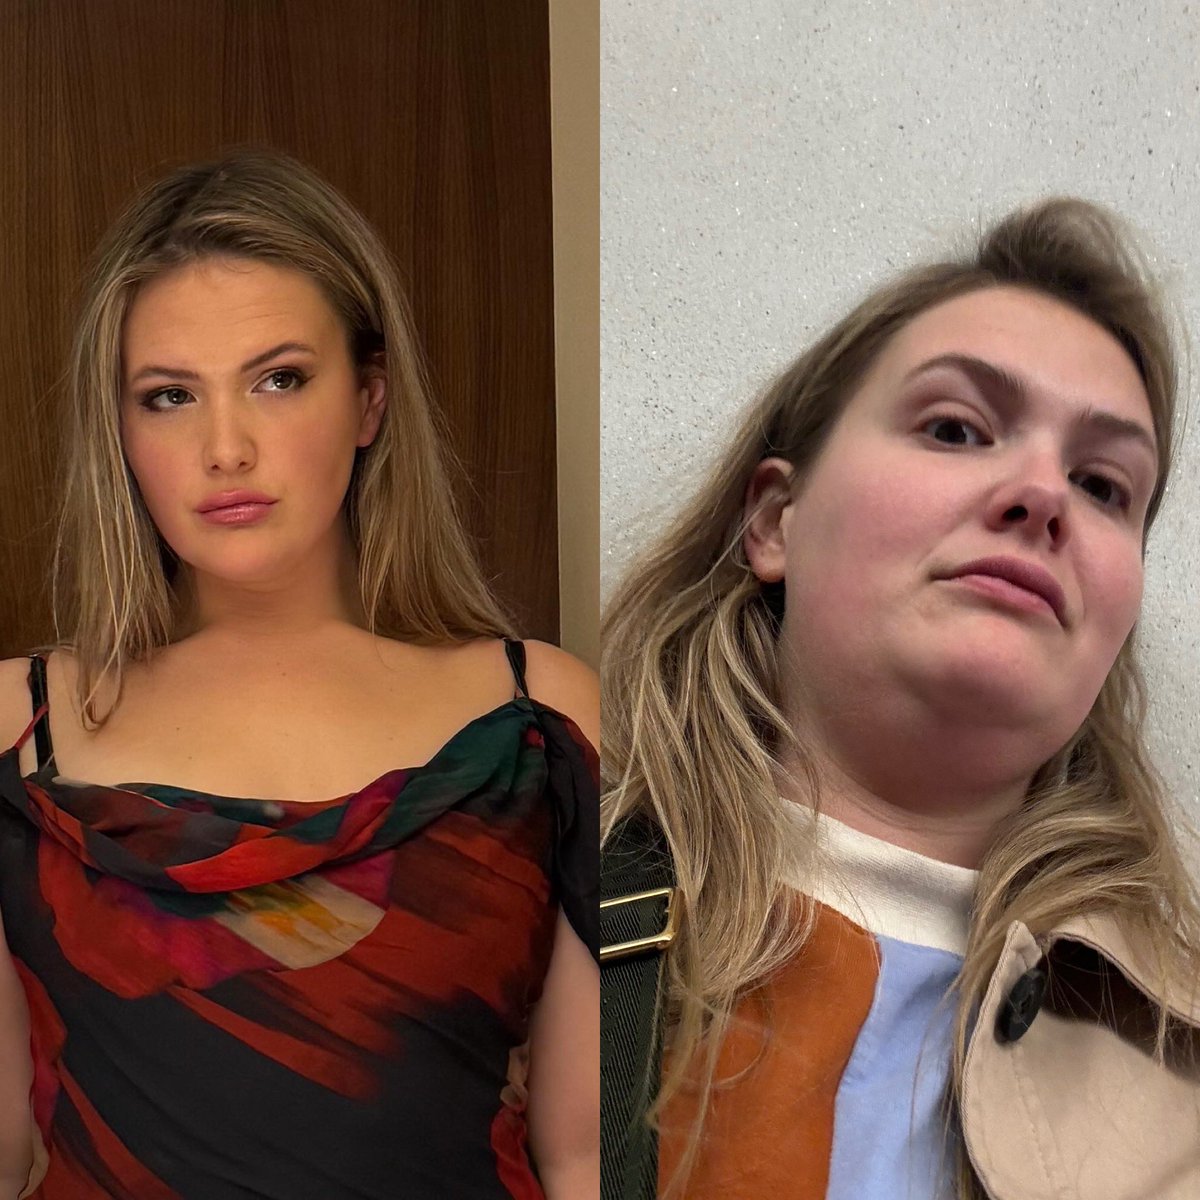 Apparently the person on the right has been claiming to be me and I would just like to confirm that I only EVER look like the left photo and the person on the right is very much an imposter. Thank you.